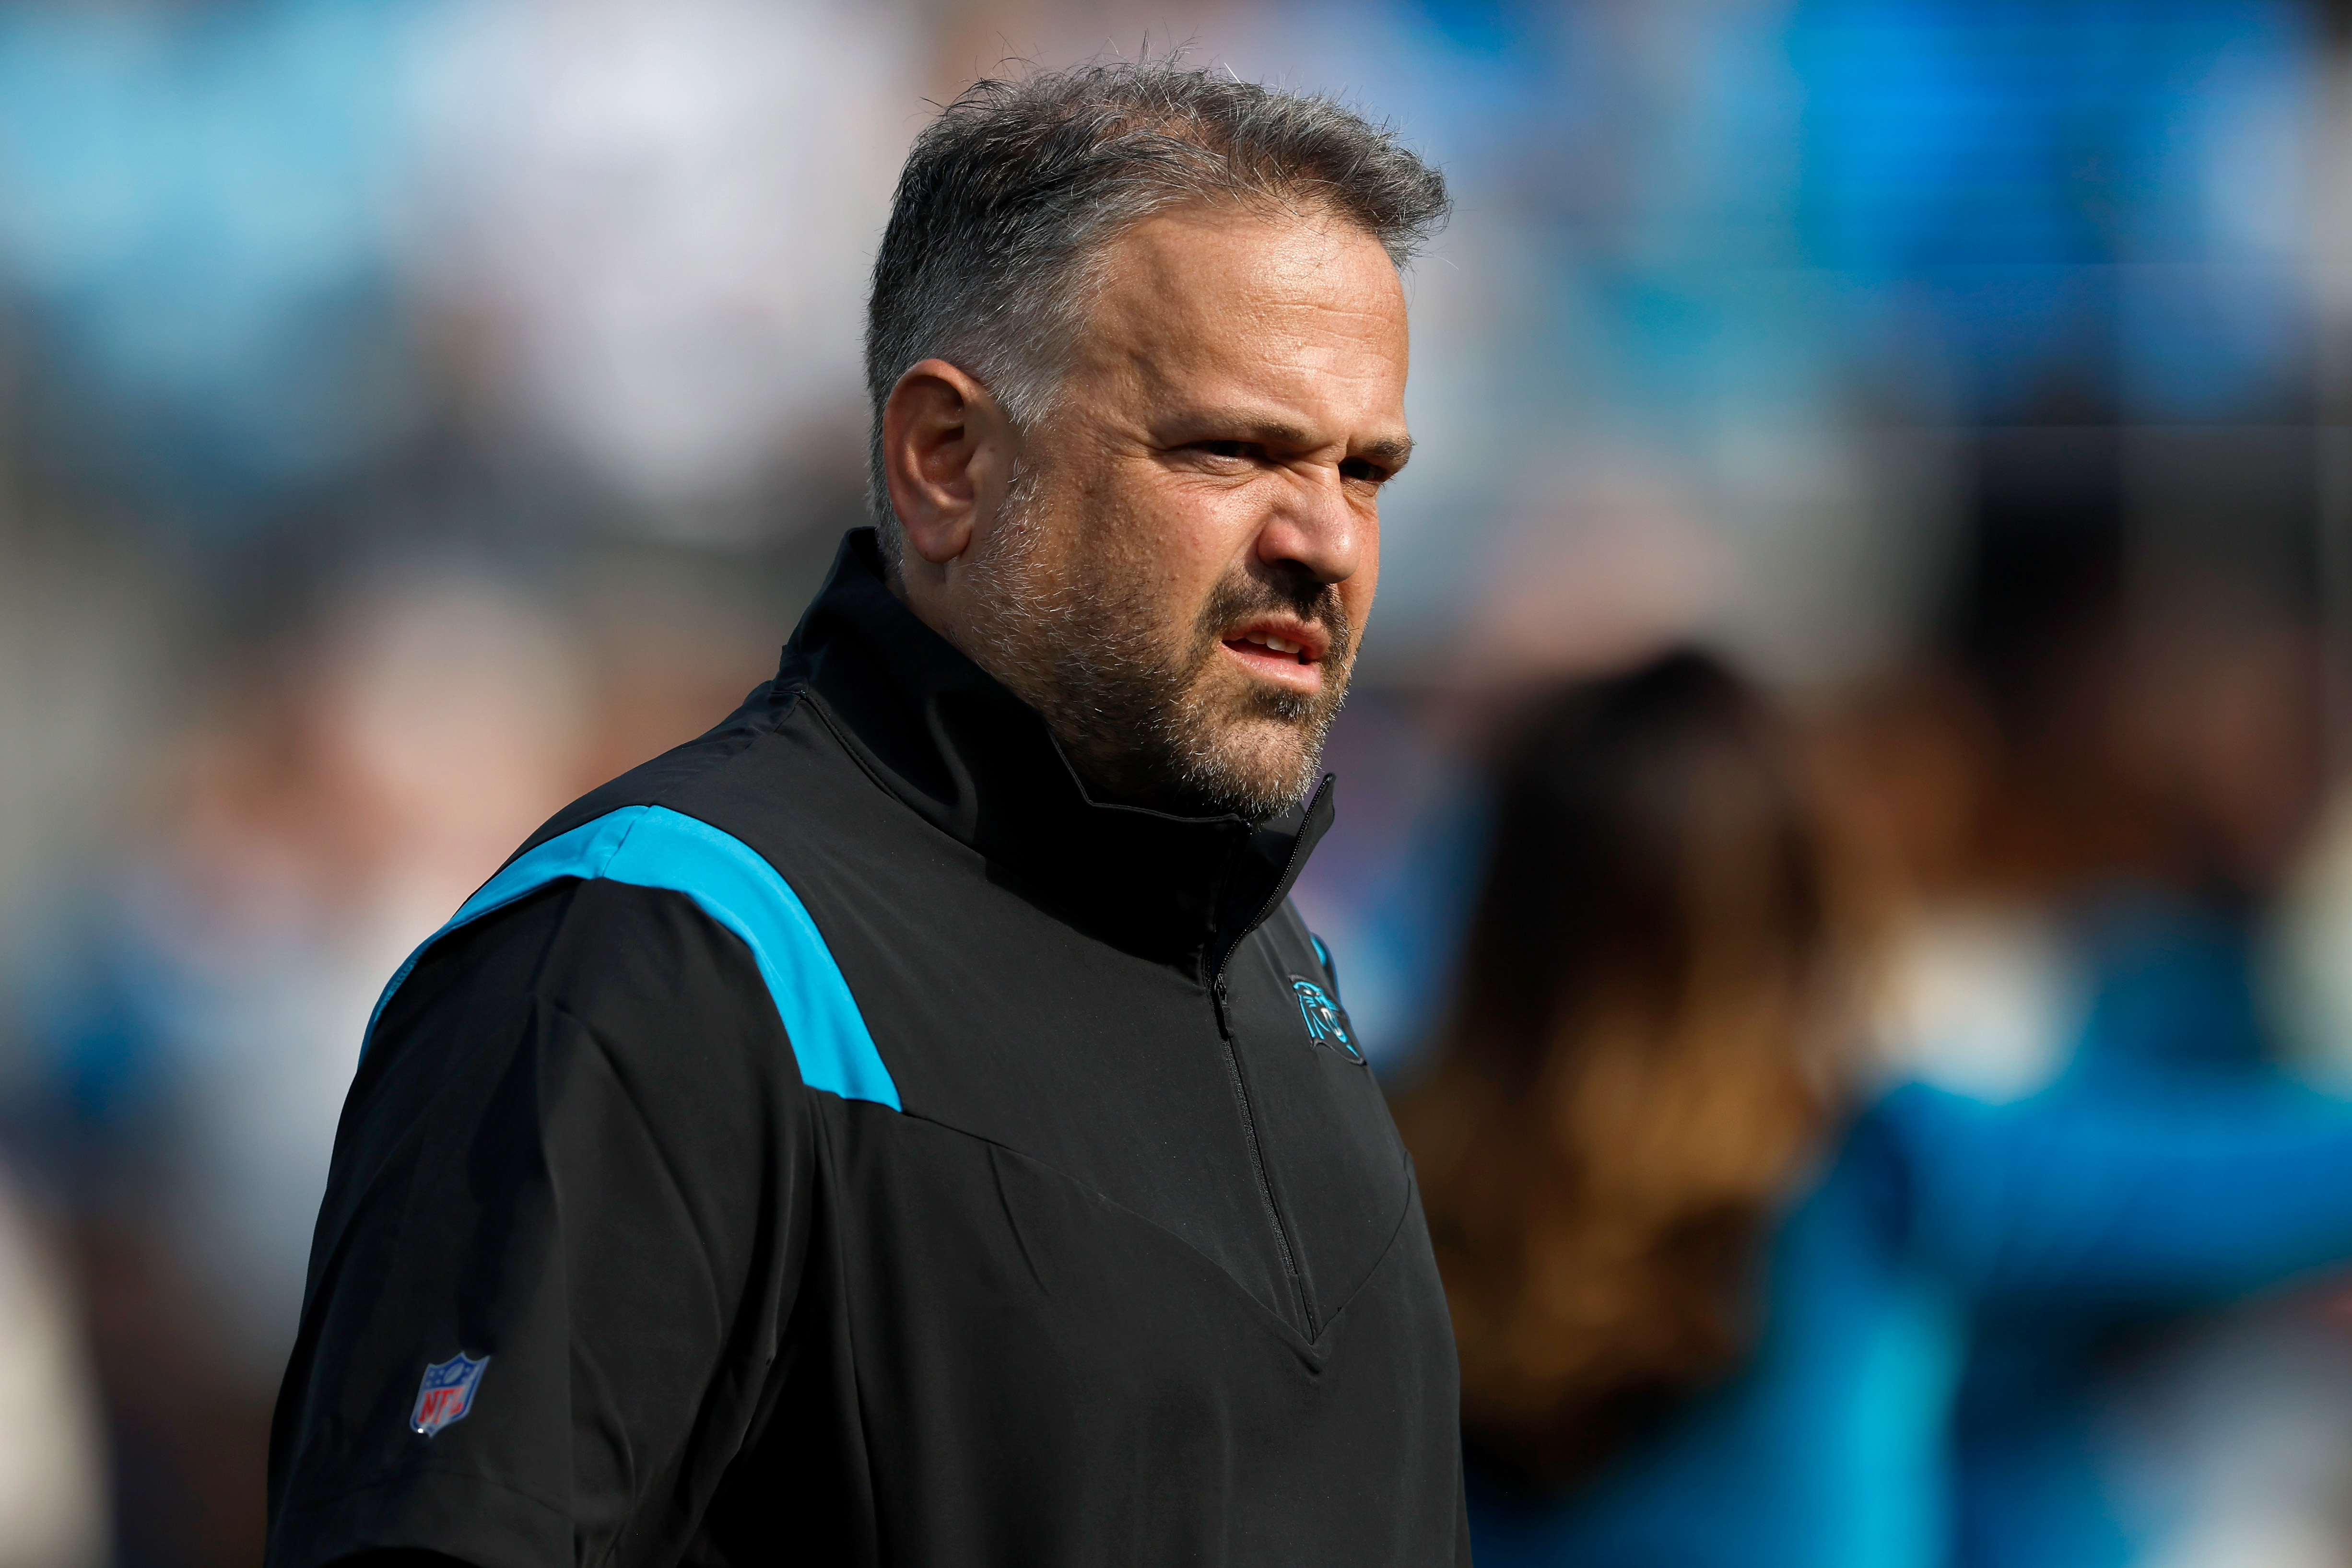 Panthers head coach Matt Rhule looks on during a game